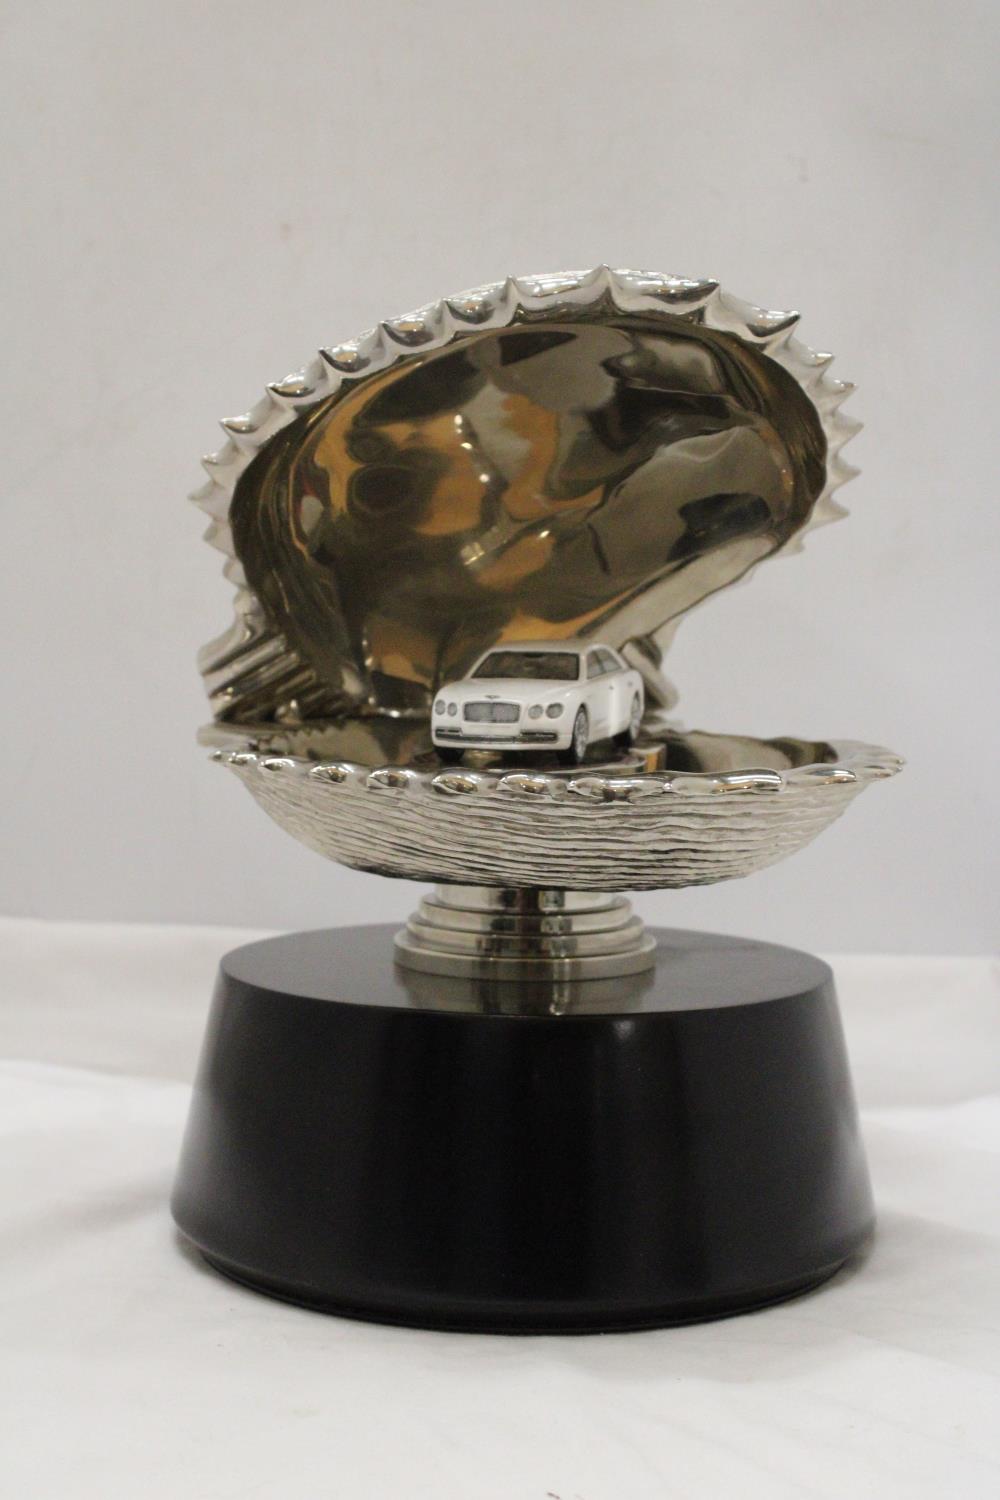 A LARGE CHROME OYSTER SHELL, ENCLOSING A BENTLEY CAR, ON A BASE, HEIGHT 30CM, DIAMETER APPROX 24CM - Image 2 of 6